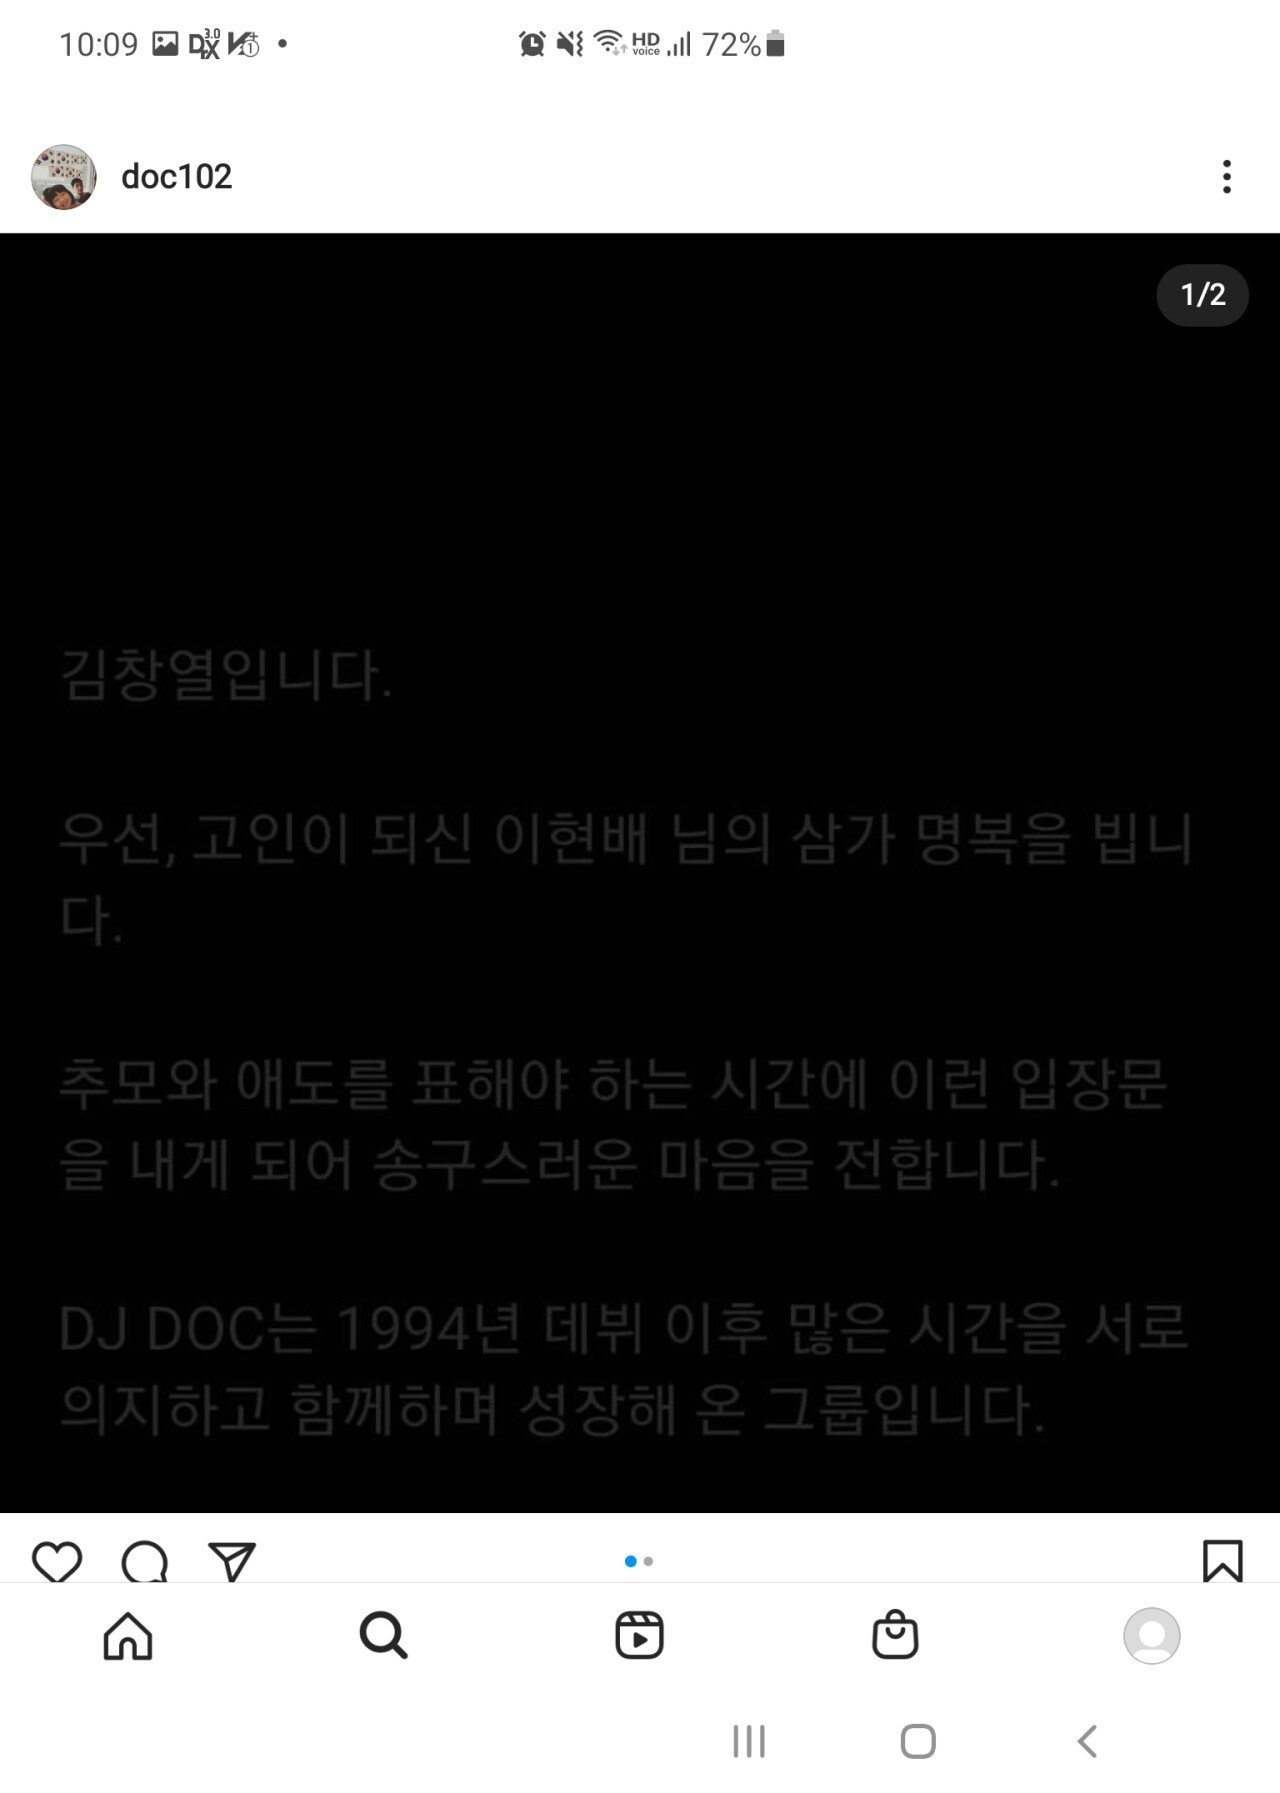 DOC Kim Chang-ryul posted a statement on Instagram